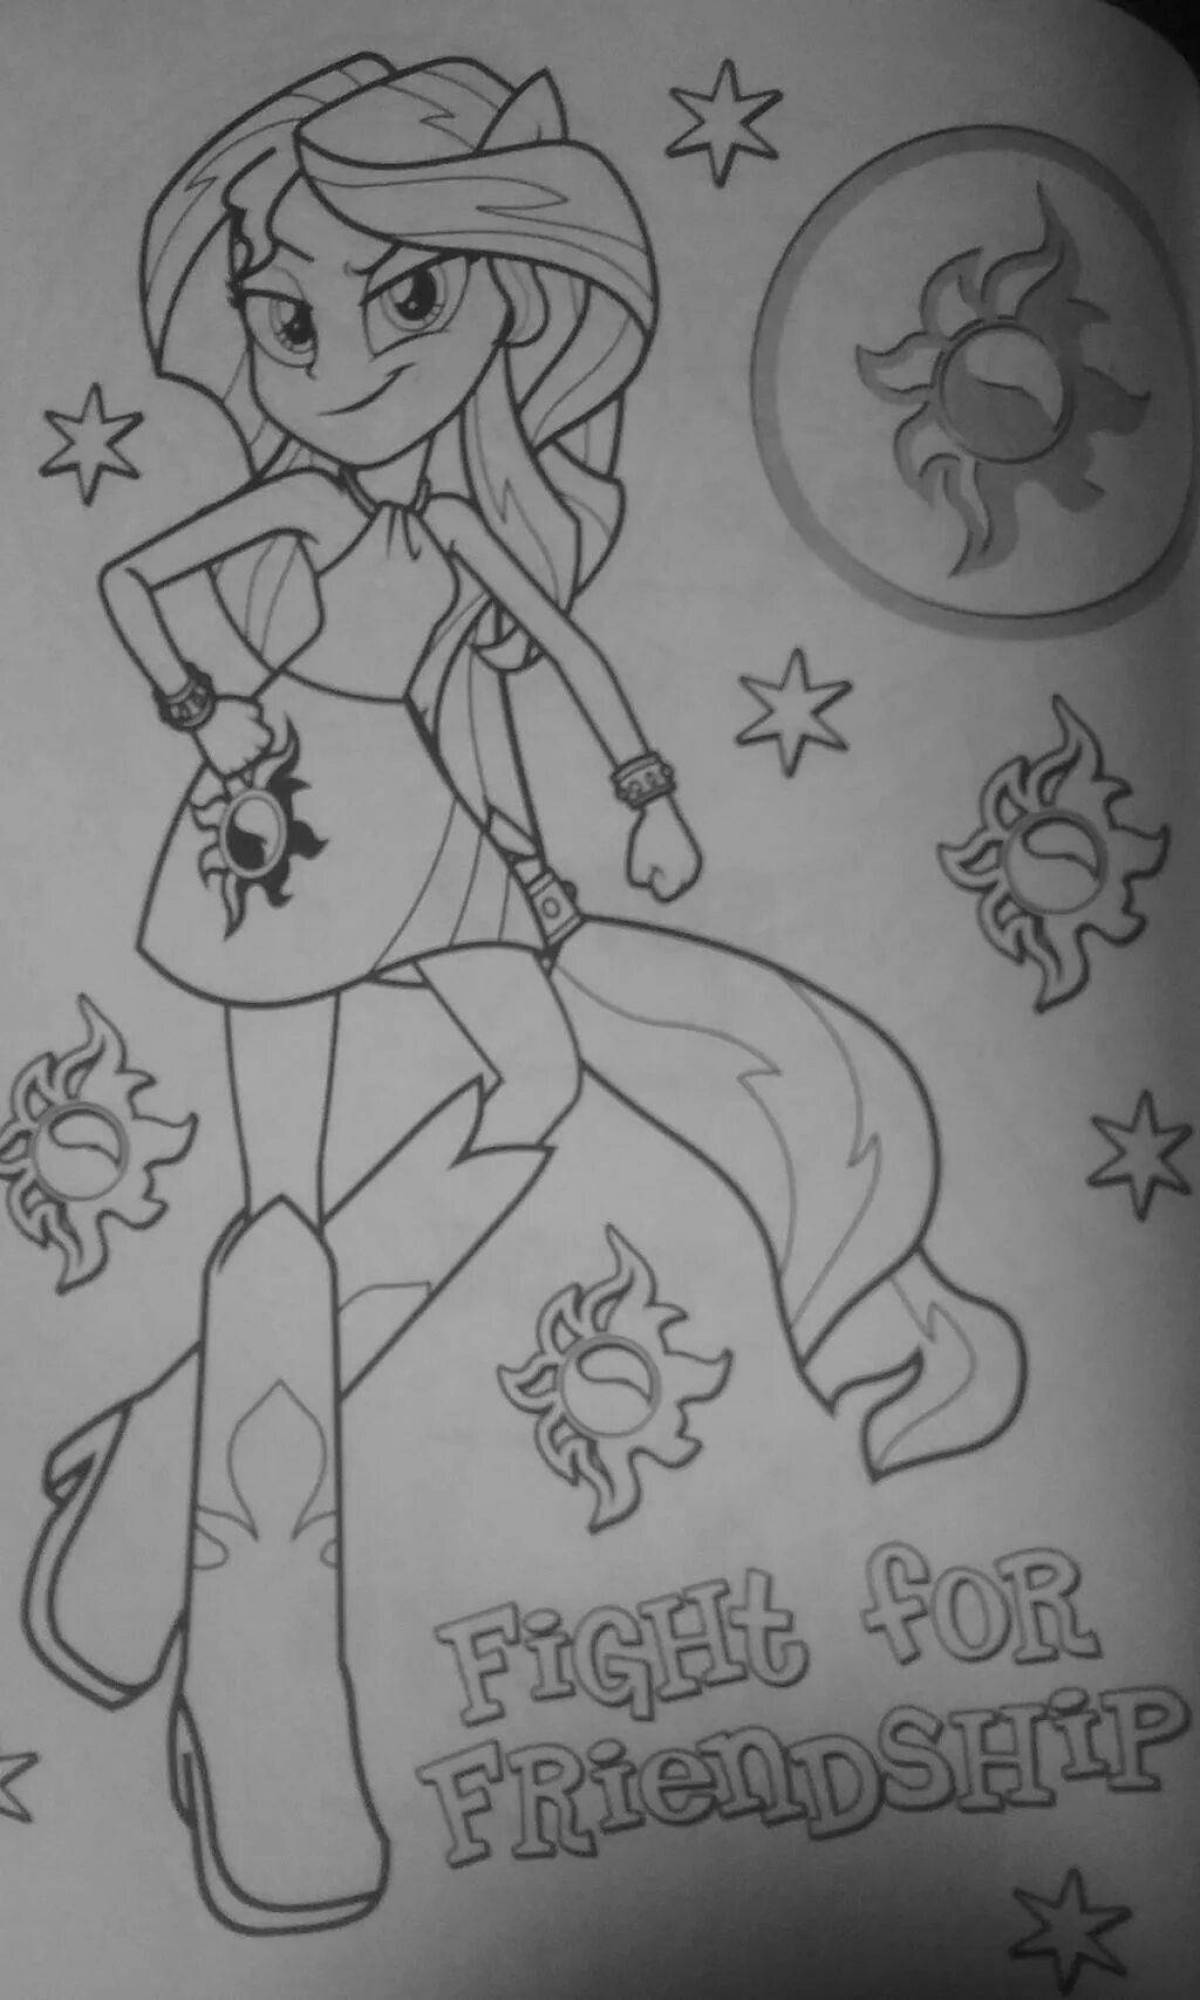 Adorable sunset shimmer coloring book